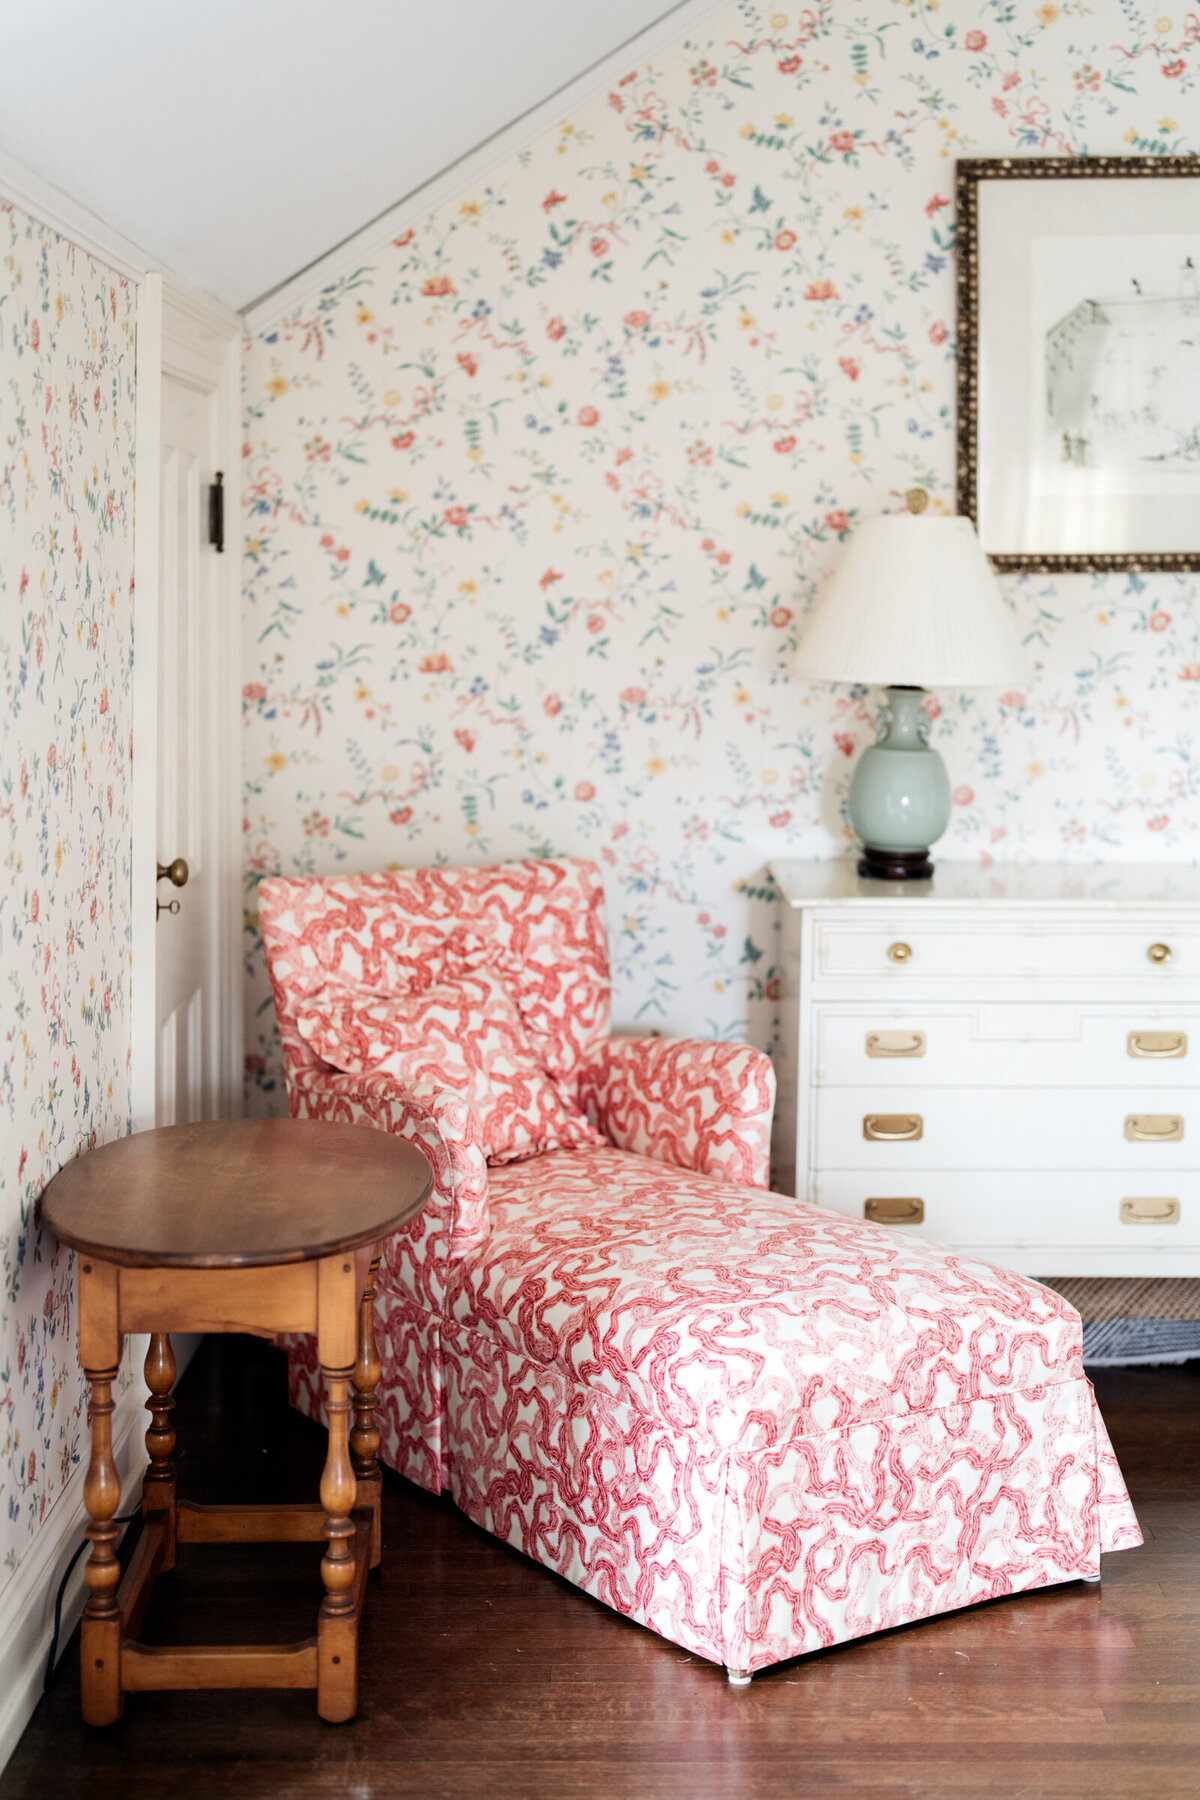 details in the bridal suite include pink chaise and floral wallpaper